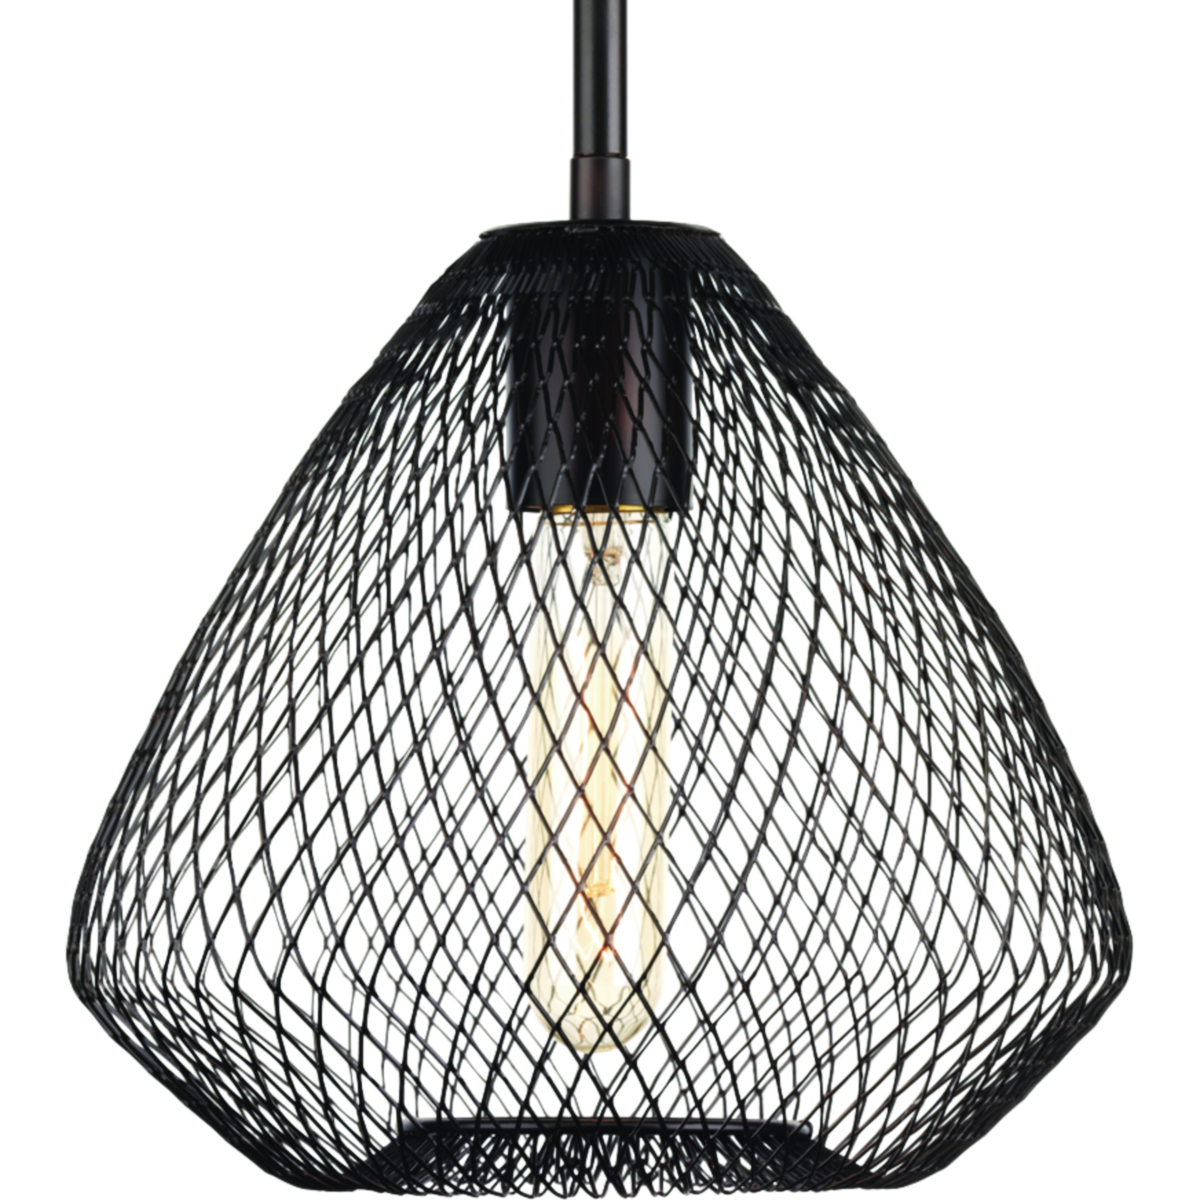 Mesh pendants offer an interweaving open cage frame that can serve as a focal point in any lighting design. These one-light pendants are ideal individually, mix and match, use in cluster or in groups.